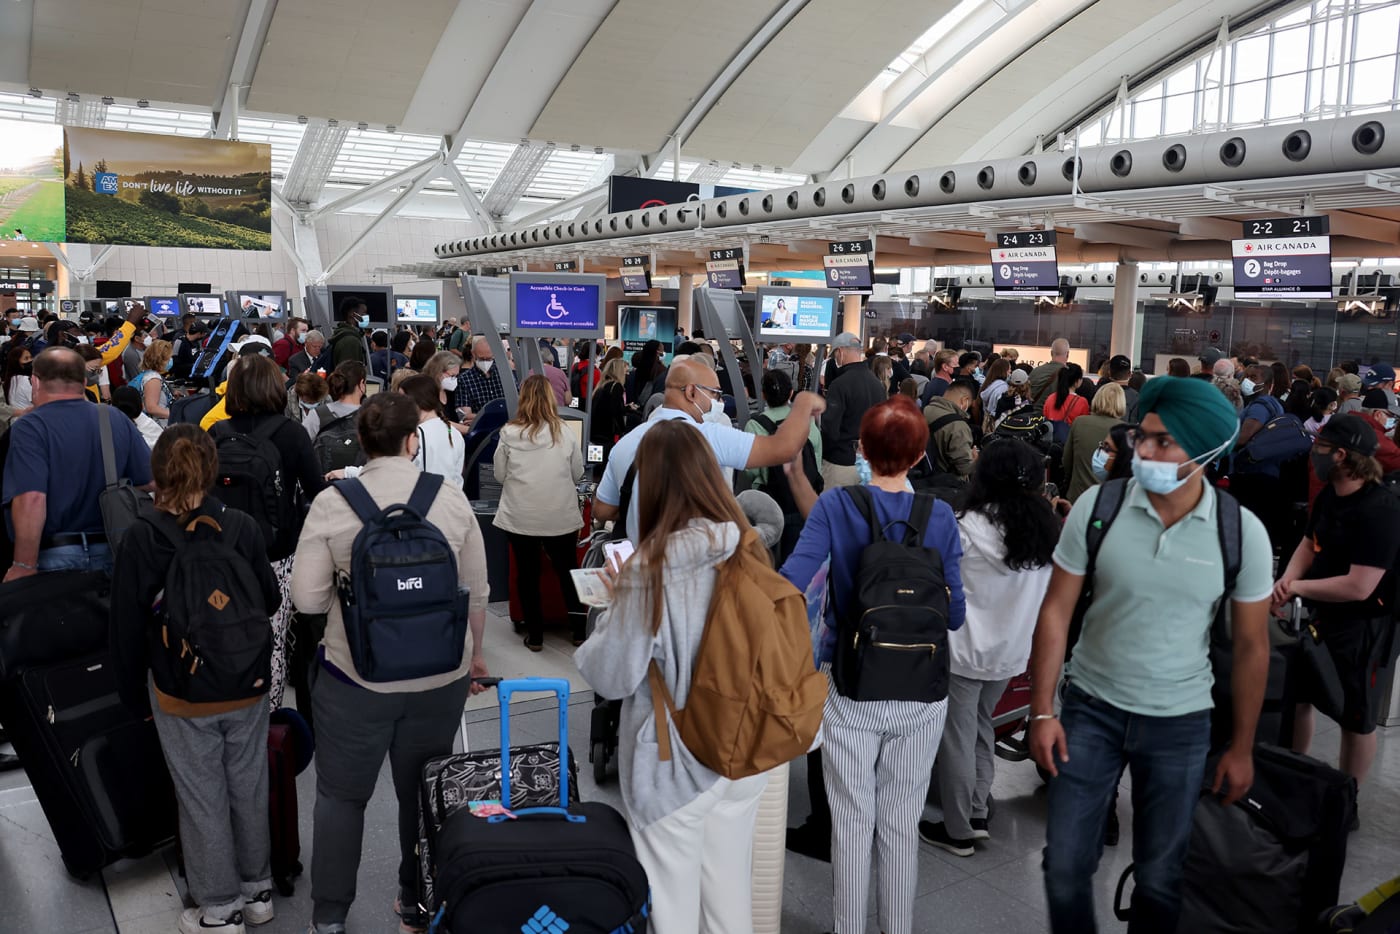 Toronto's Pearson Airport Is Now The World's Second-worst For Delays